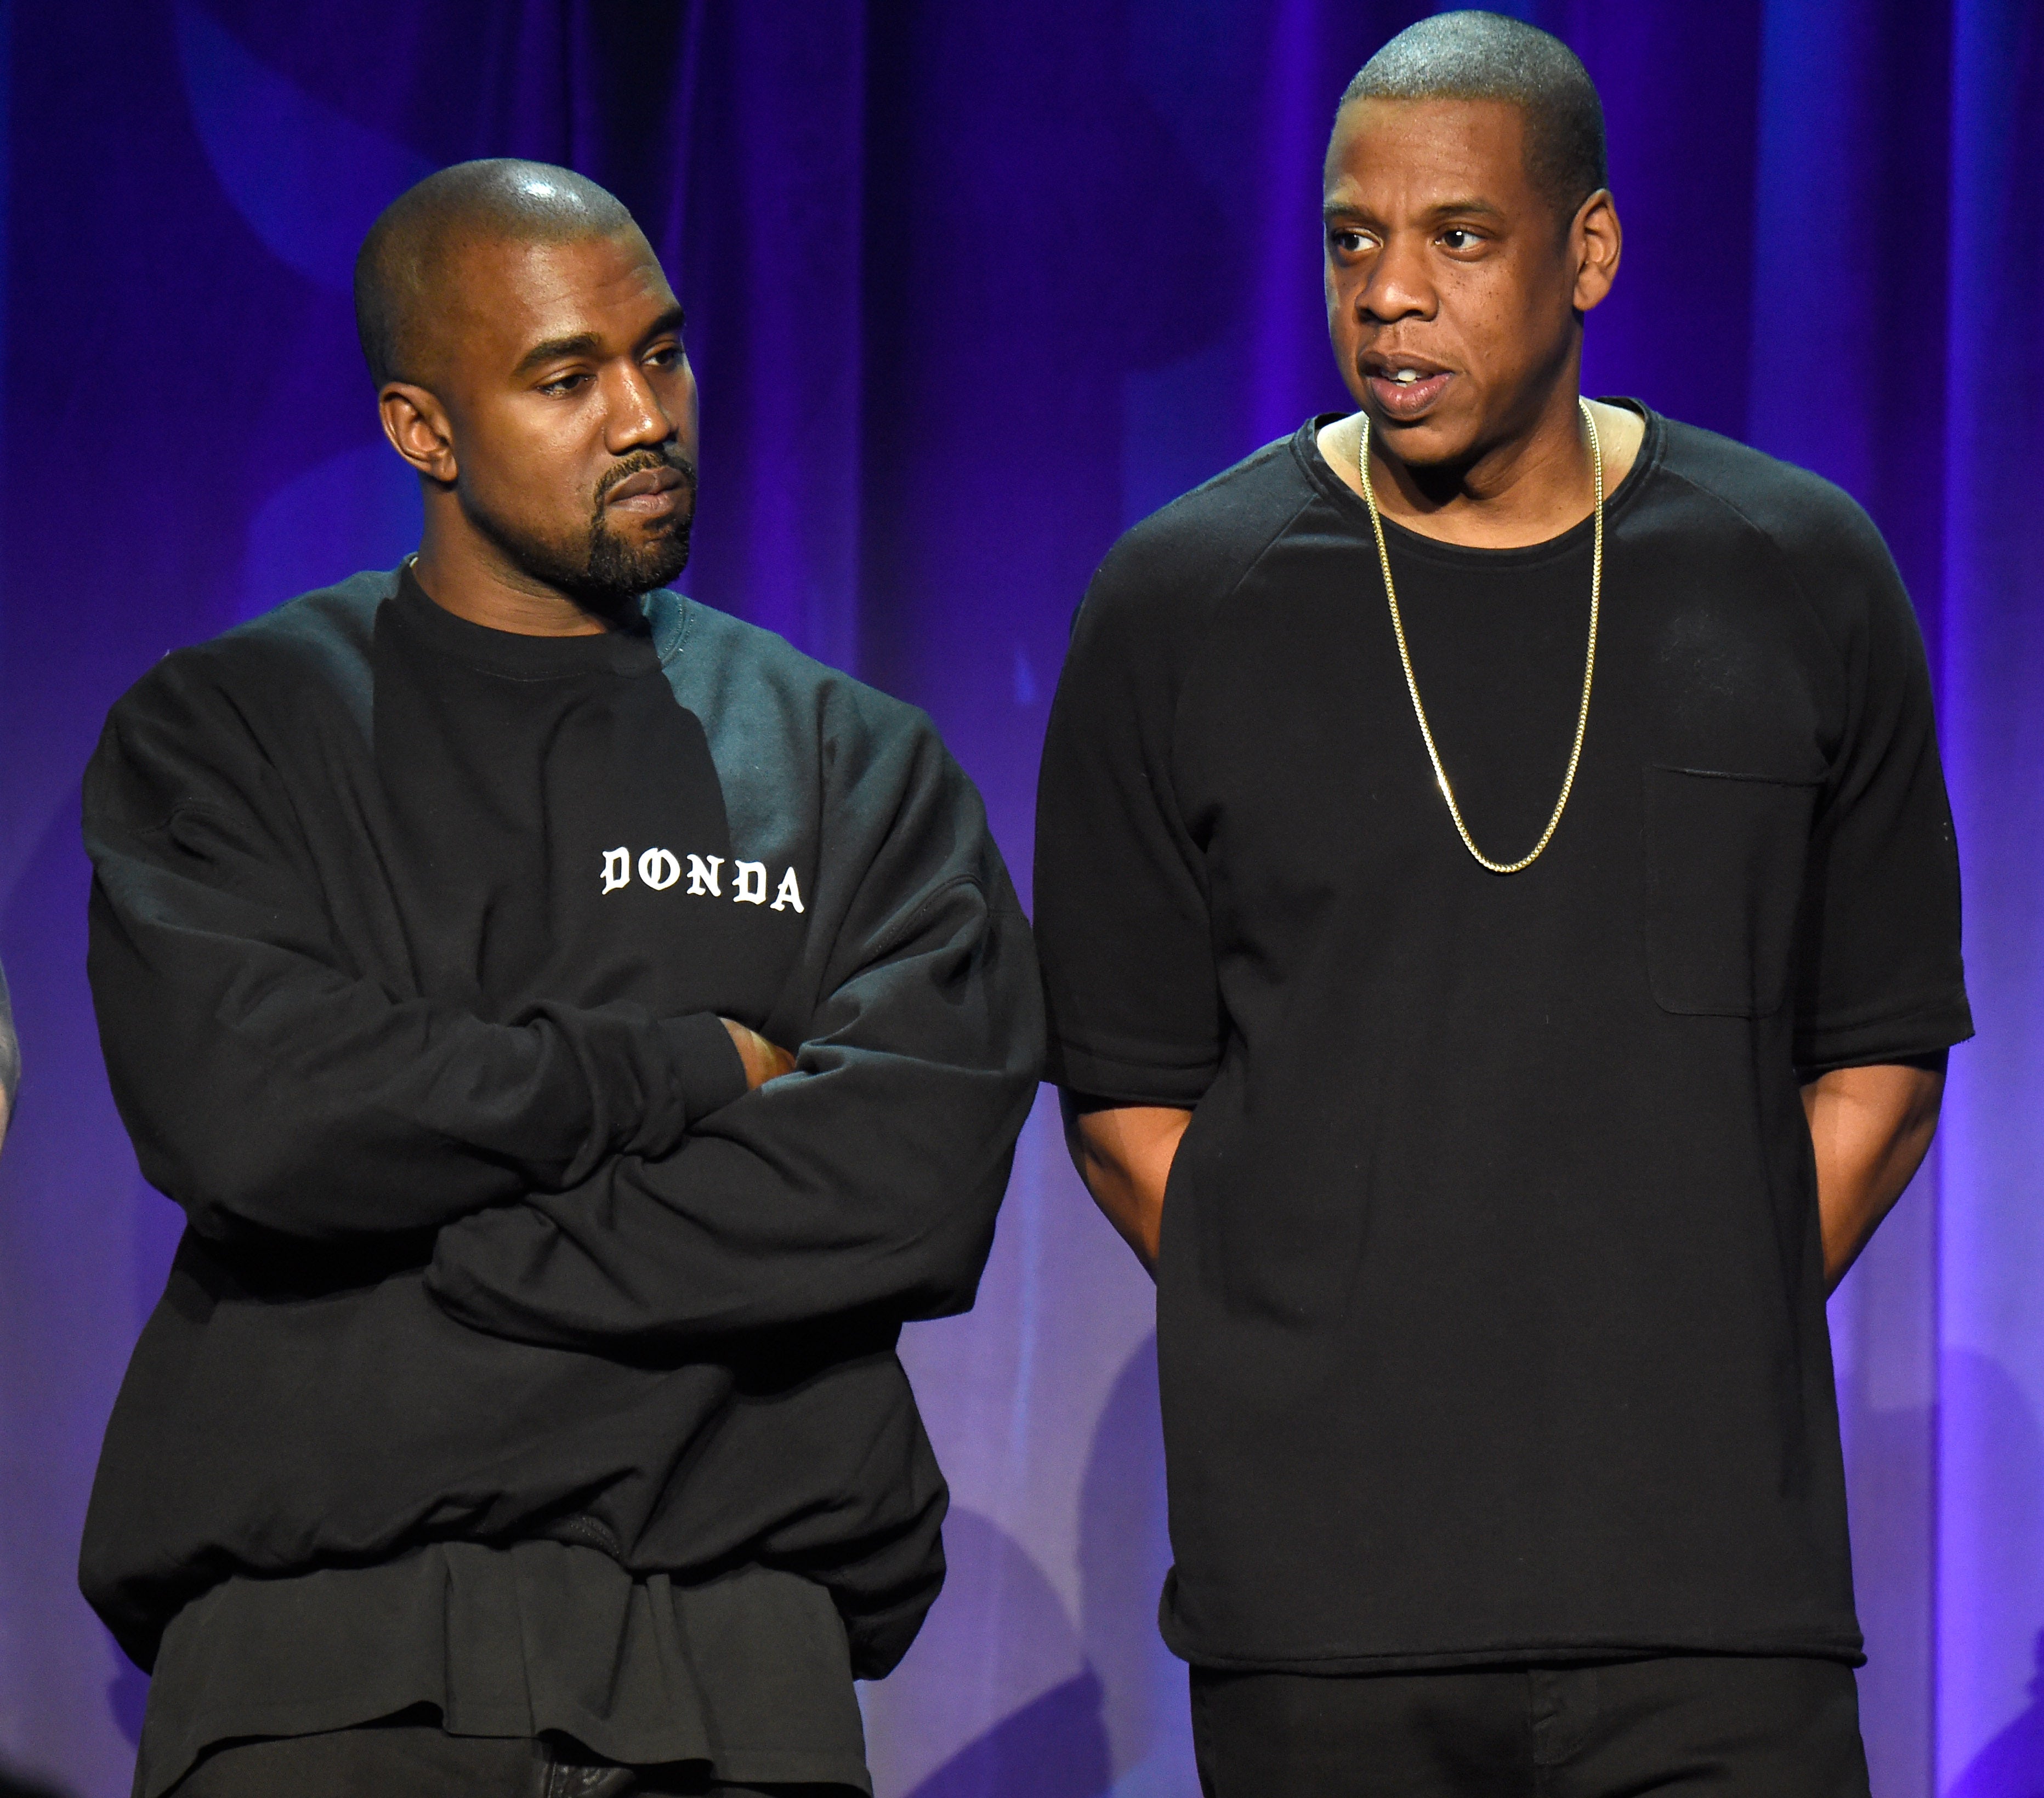 BFFs No More: Kanye West Splits With JAY-Z's Tidal, Lawsuit Could Be On The Horizon
